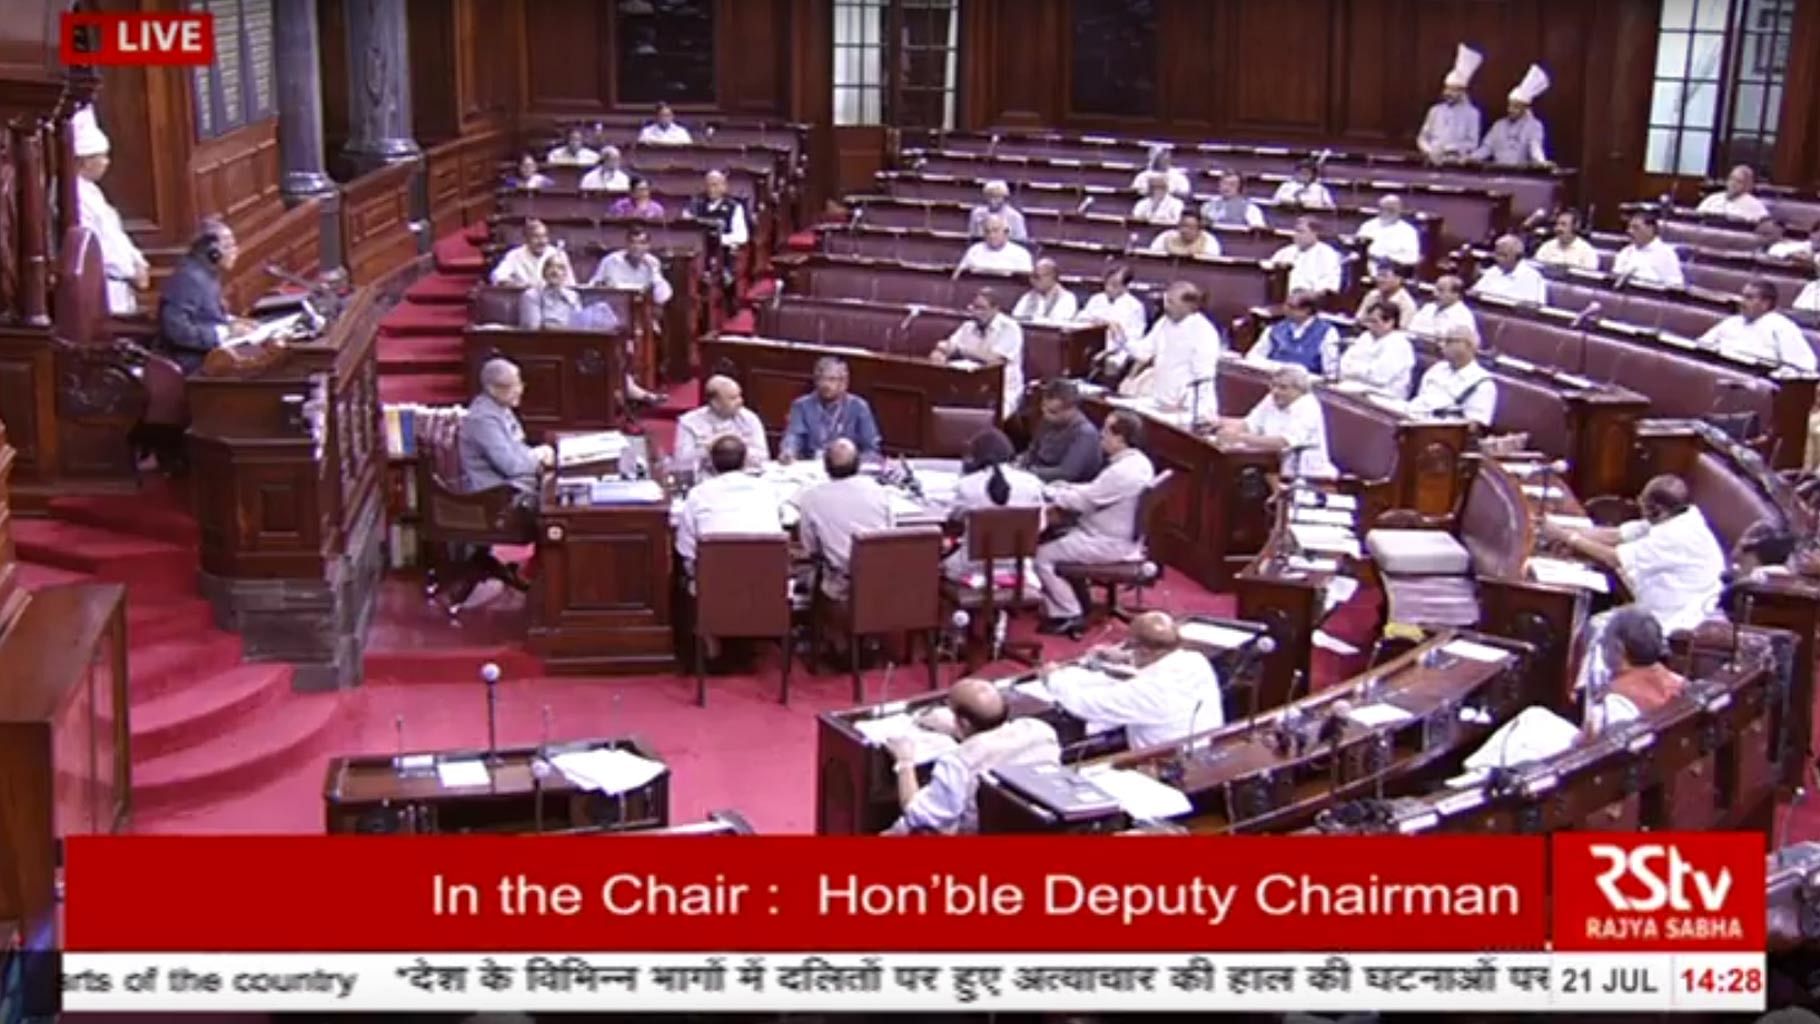 Rajya Sabha members discussing the issue of violence against members of the Dalit community on Thursday, 21 July 2016. (Photo Courtesy: RSTV)